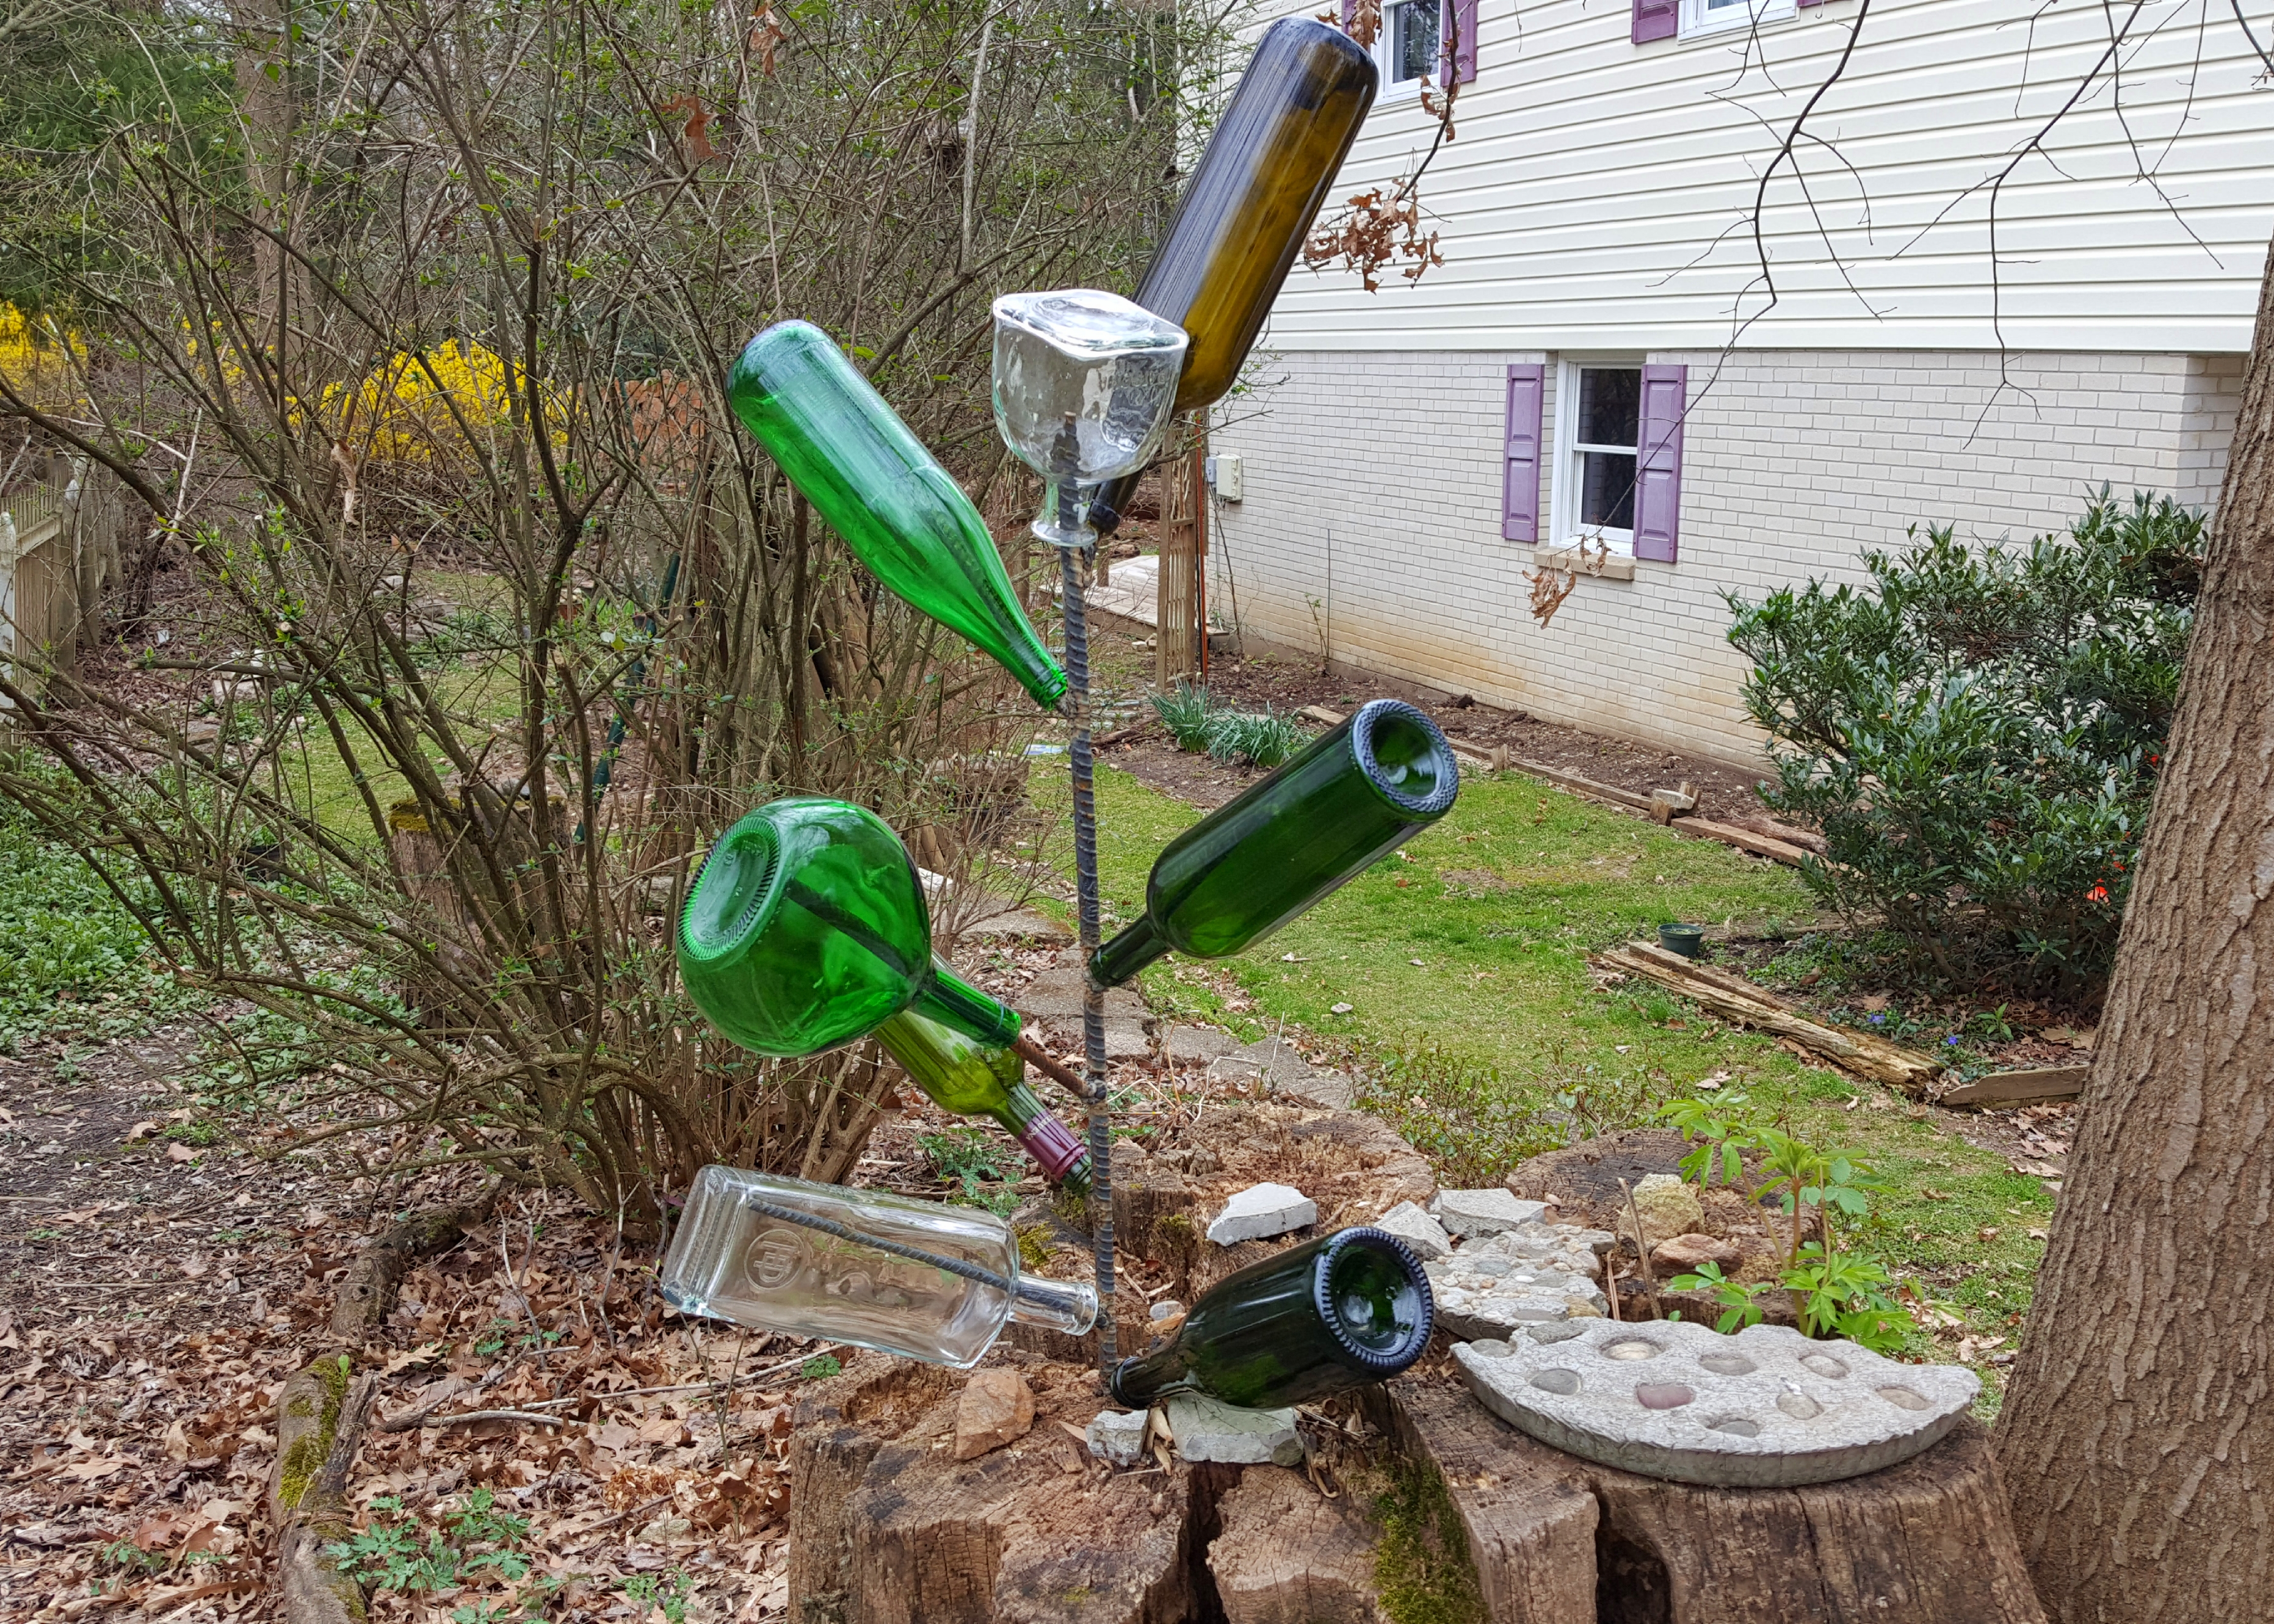 Welding project number one was a bottle tree. An older neighbor walking by commented that she really liked it. That made me feel a little better about trashing up the yard. Lol. Photo and bottle tree by Dragonfly Leathrum